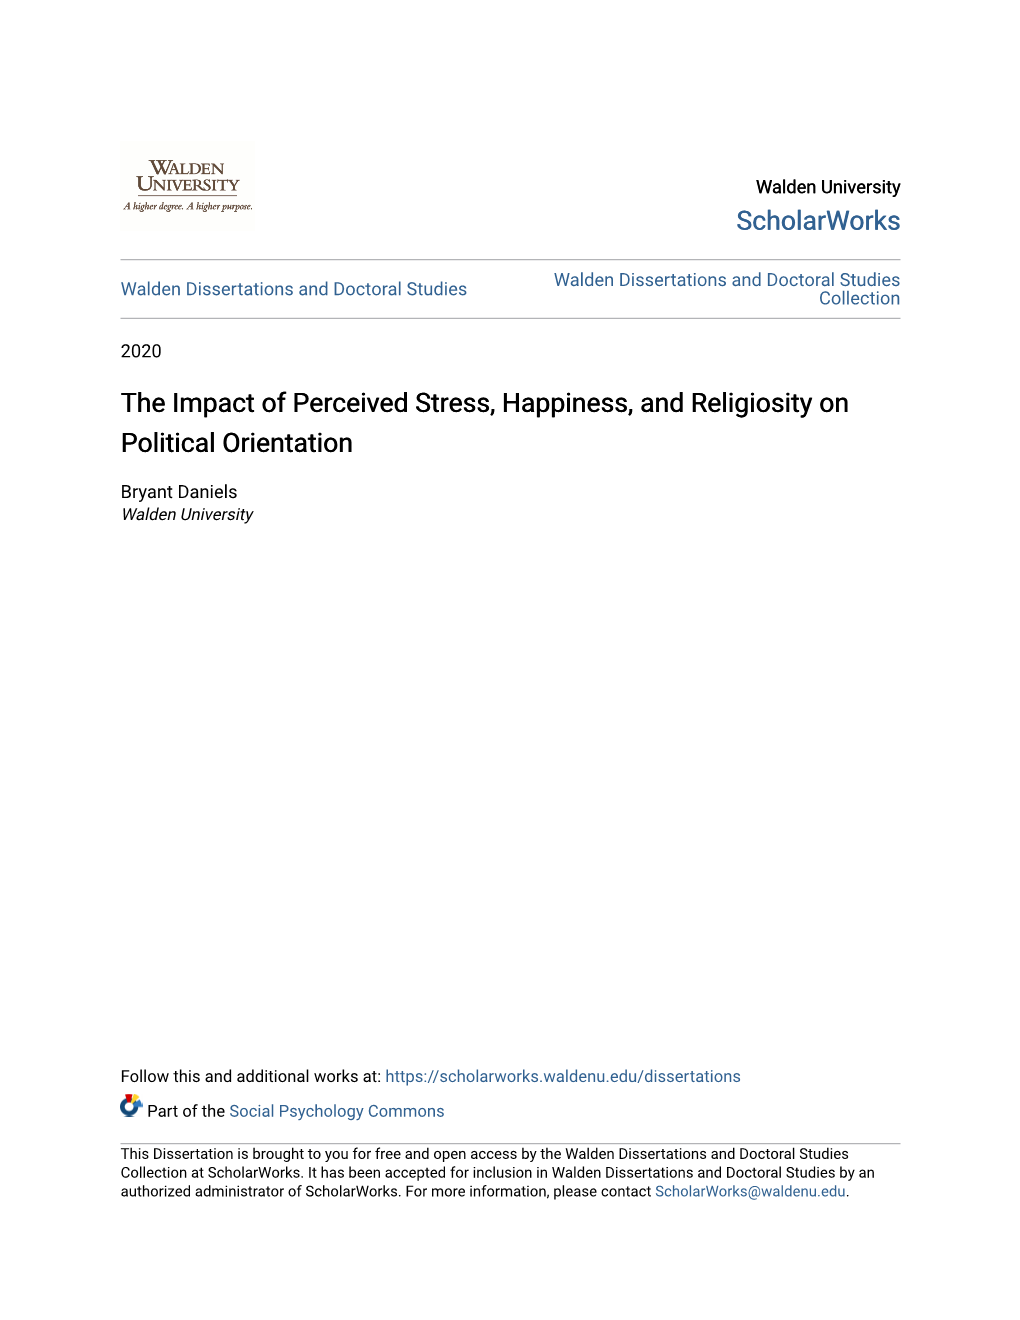 The Impact of Perceived Stress, Happiness, and Religiosity on Political Orientation